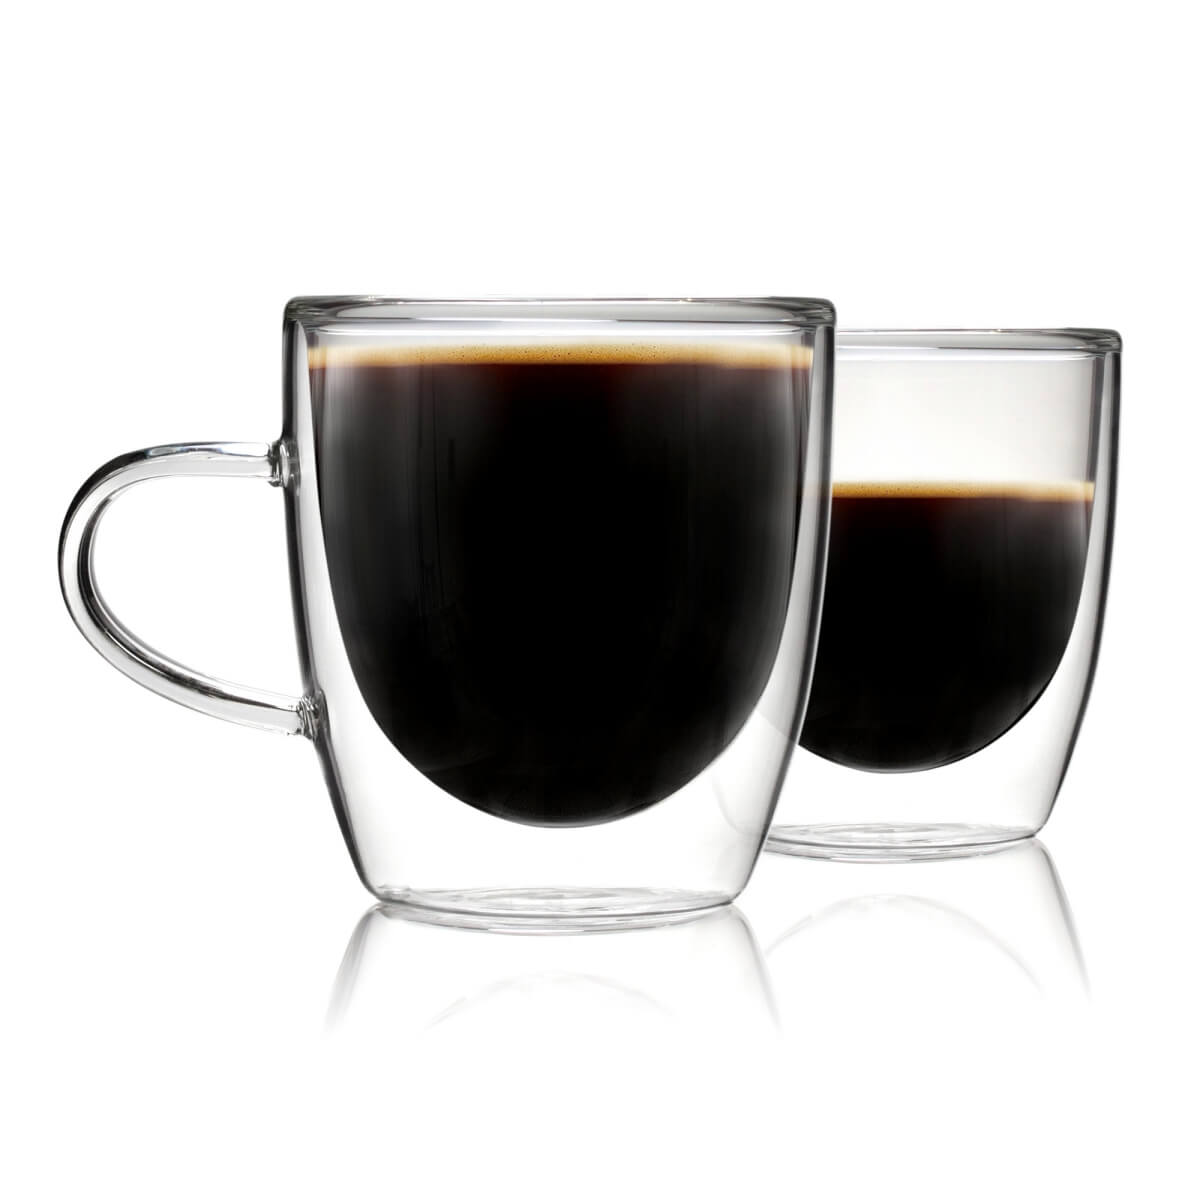 5 oz Double Walled Bubble Cups (Set of 2)